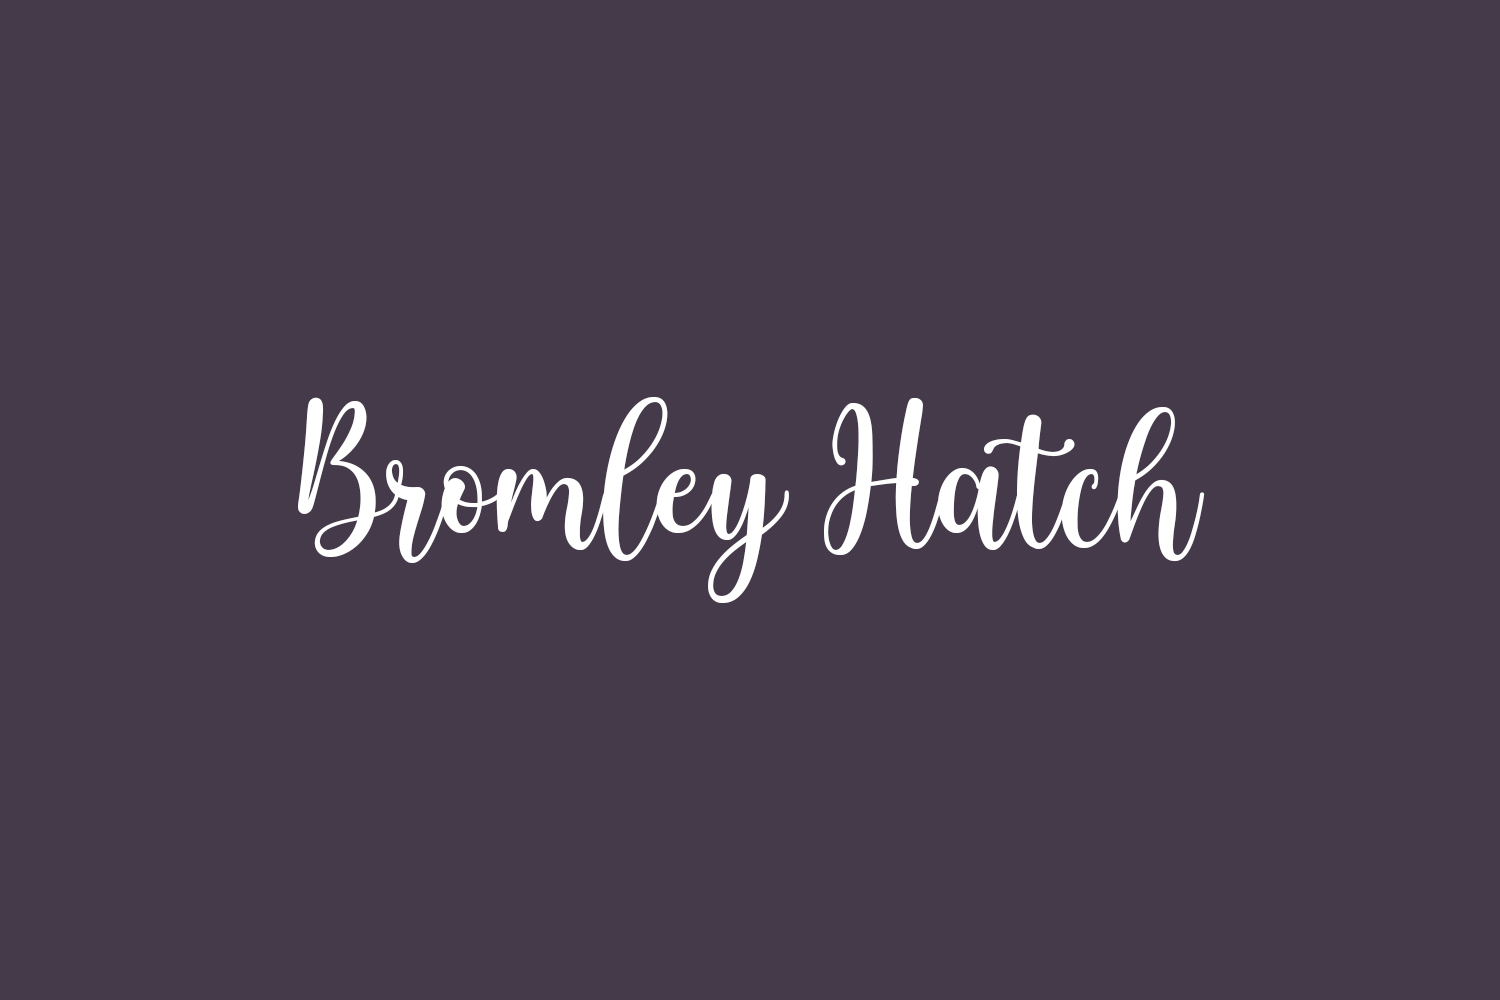 Bromley Hatch Free Font